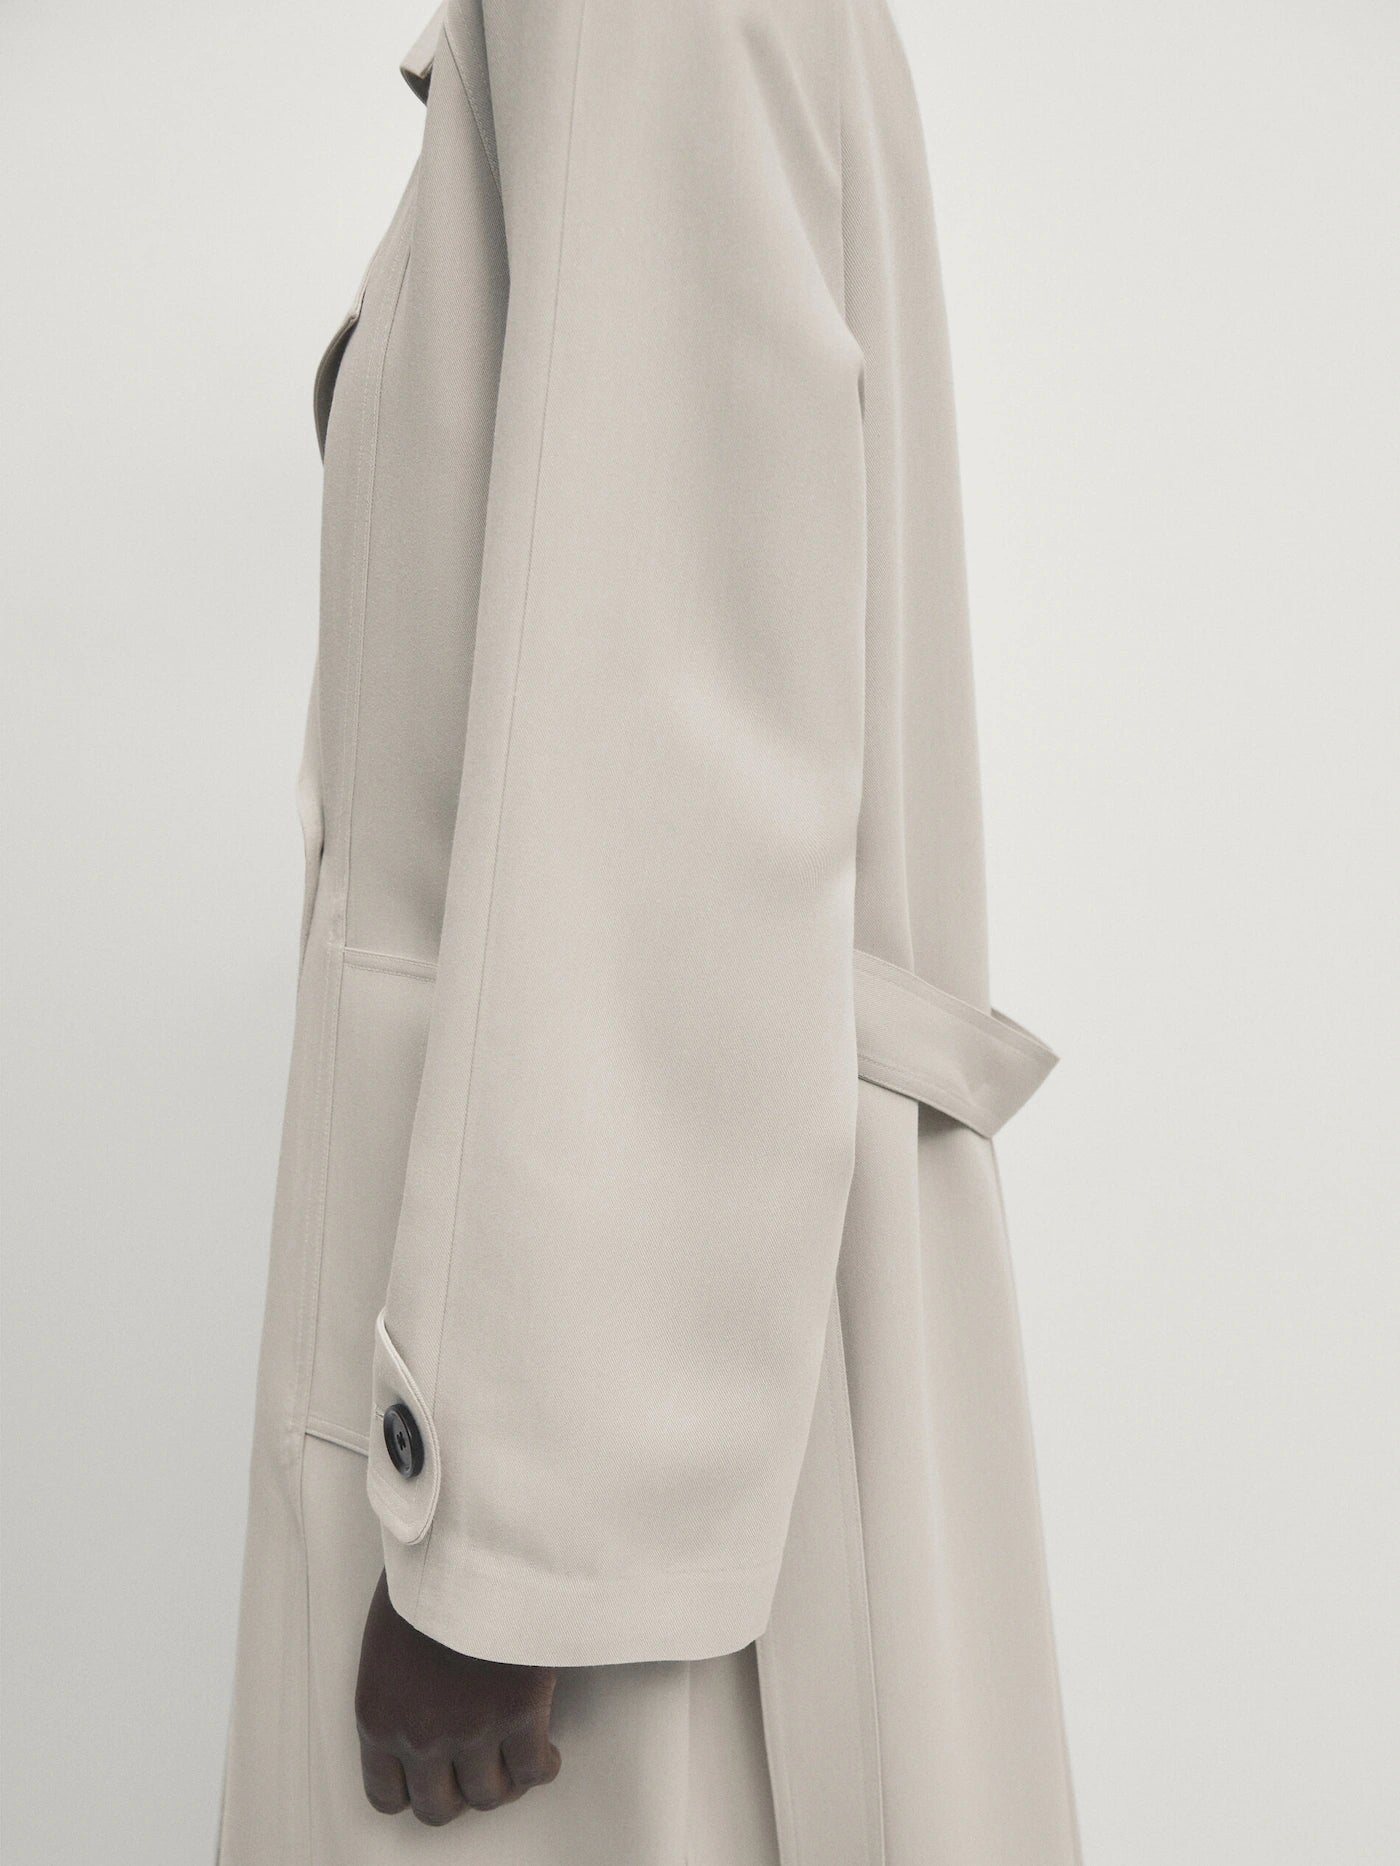 Loose-fitting trench coat with belt